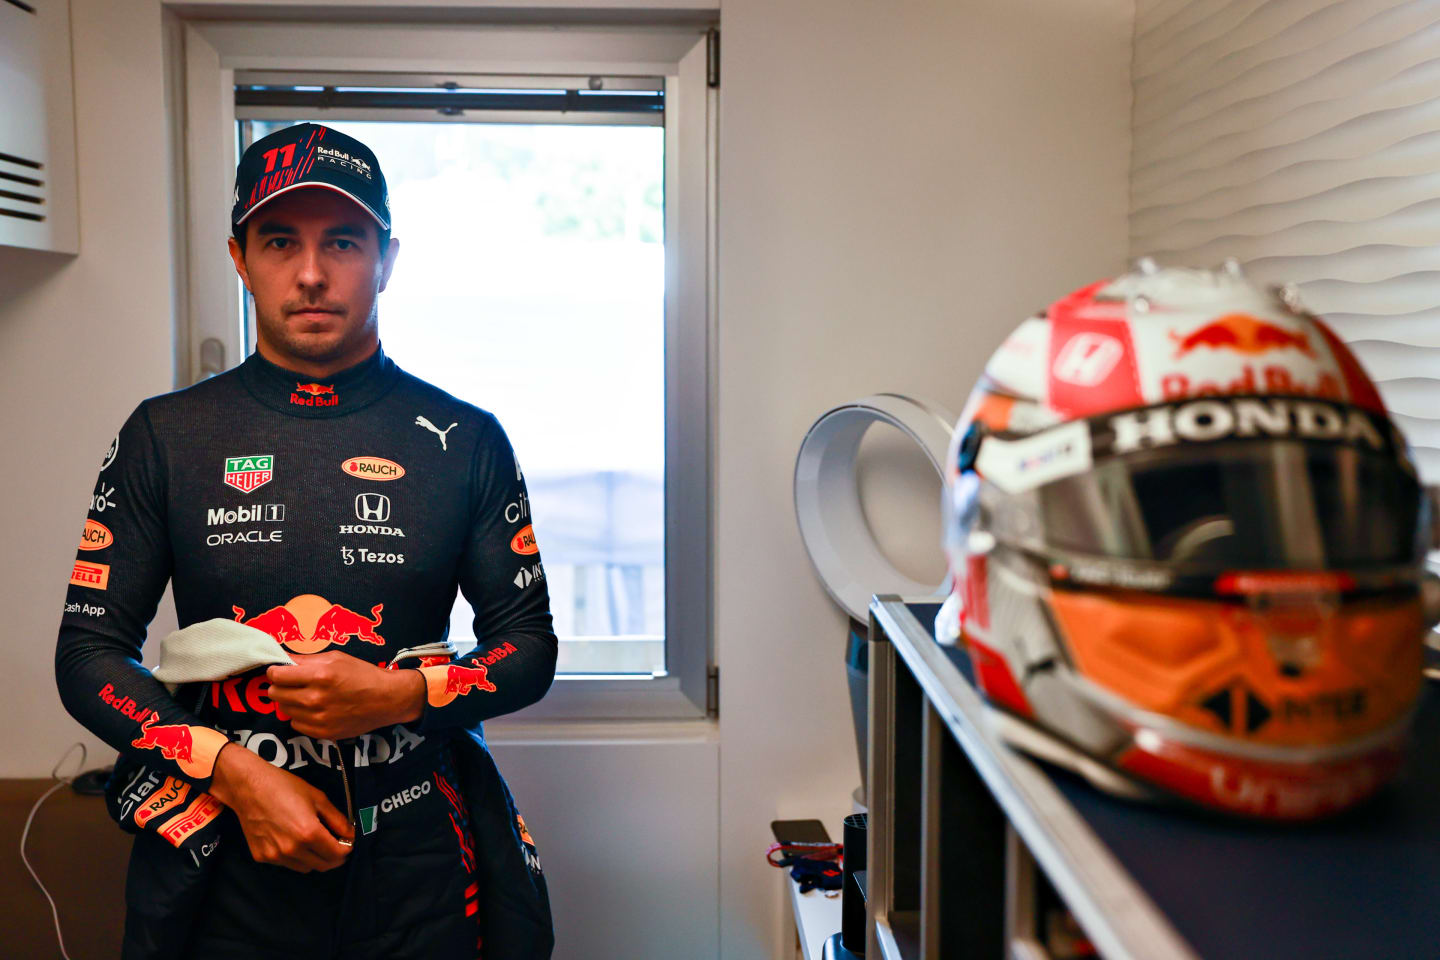 SPIELBERG, AUSTRIA - JUNE 26: Sergio Perez of Mexico and Red Bull Racing prepares to drive during